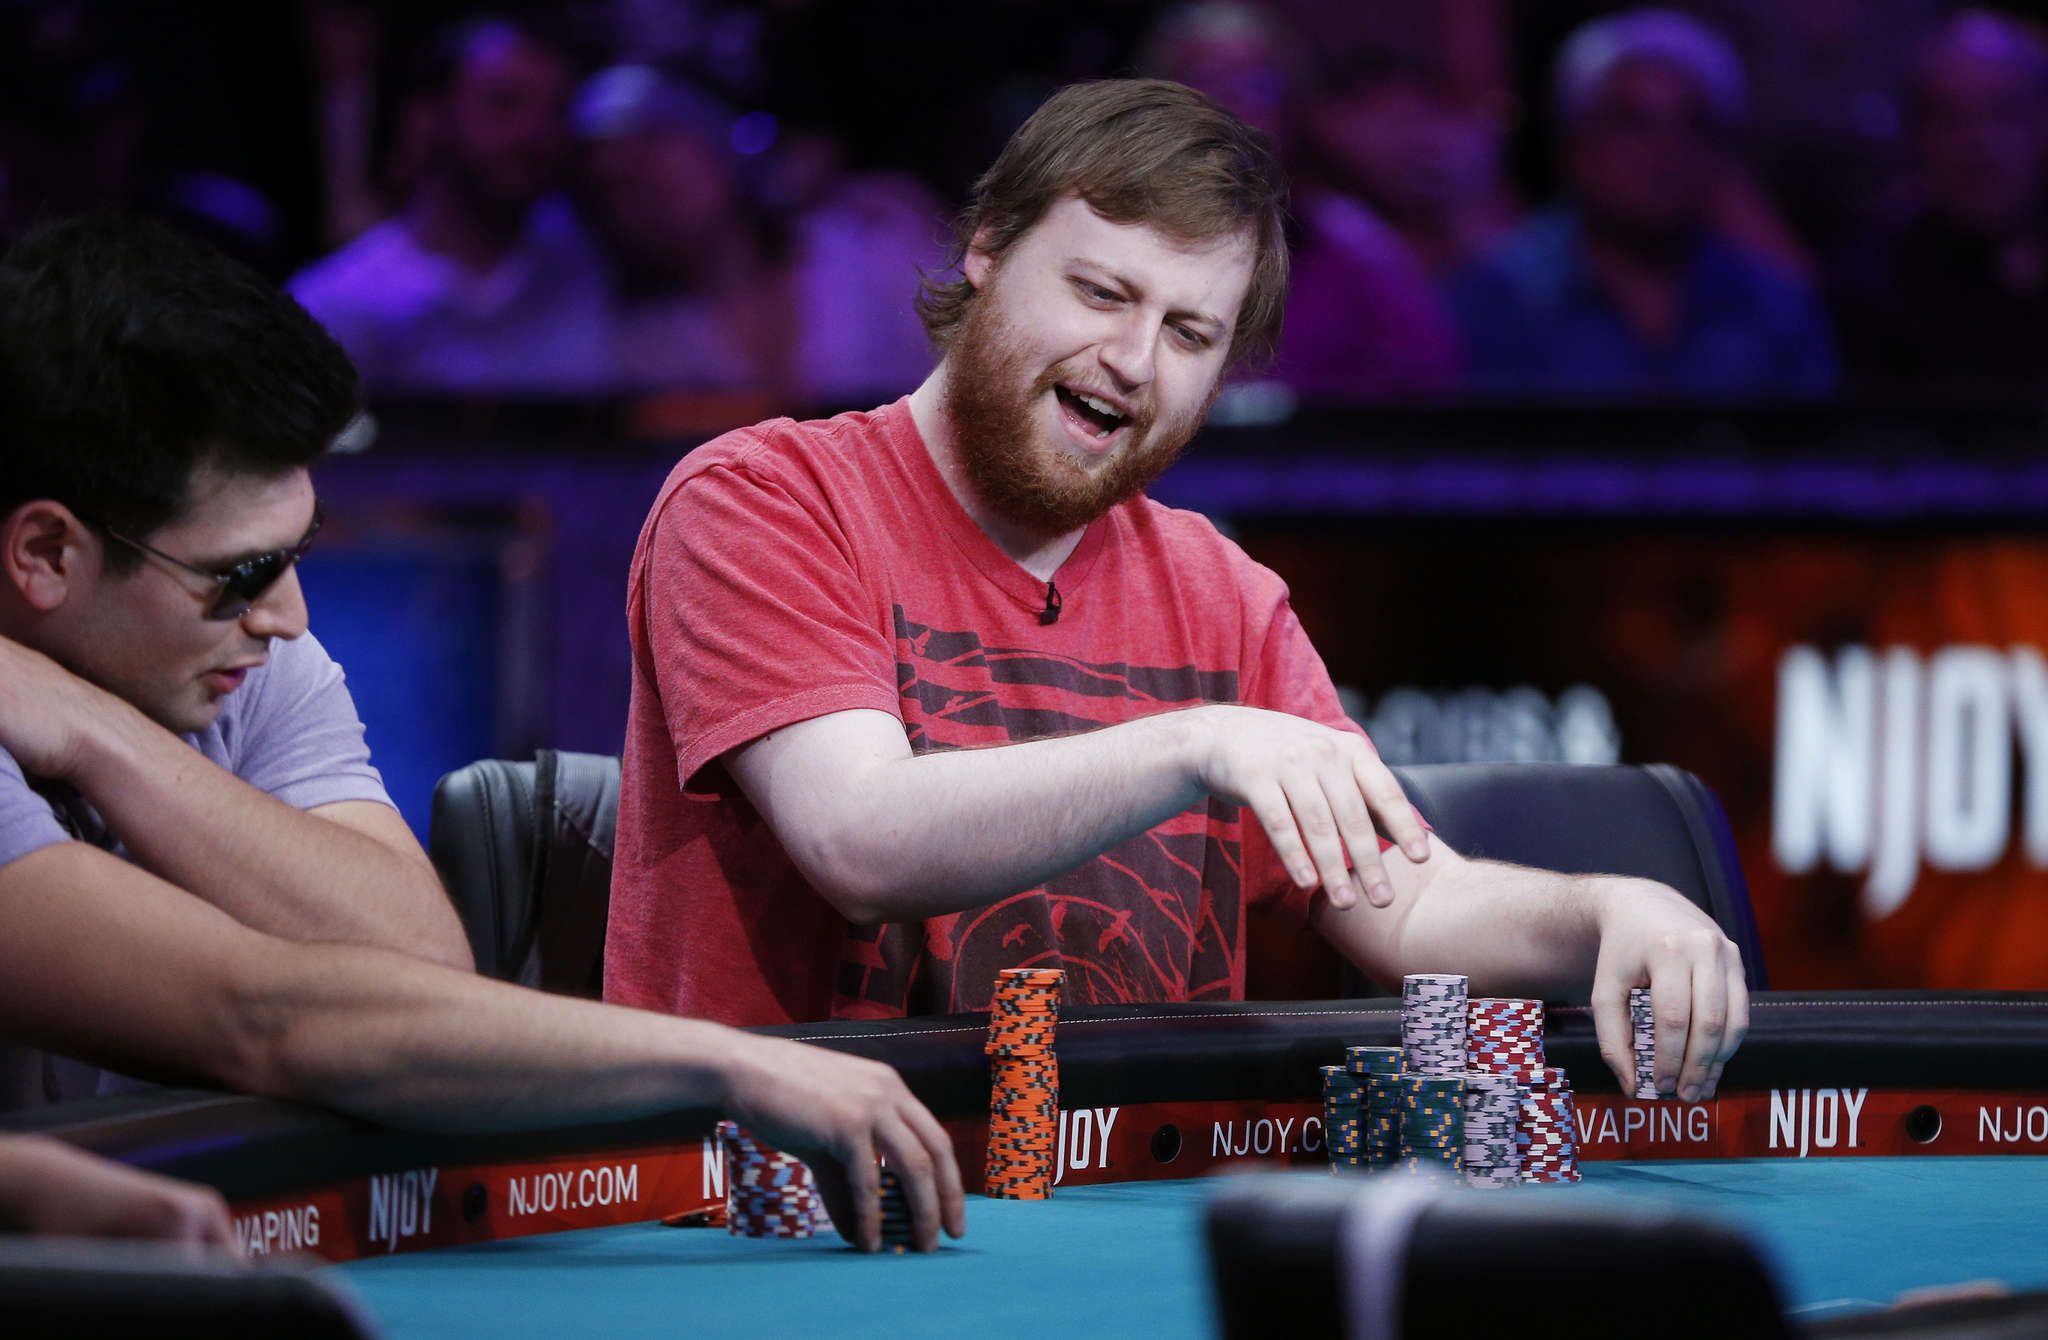 Montco man is the one to beat in World Series of Poker